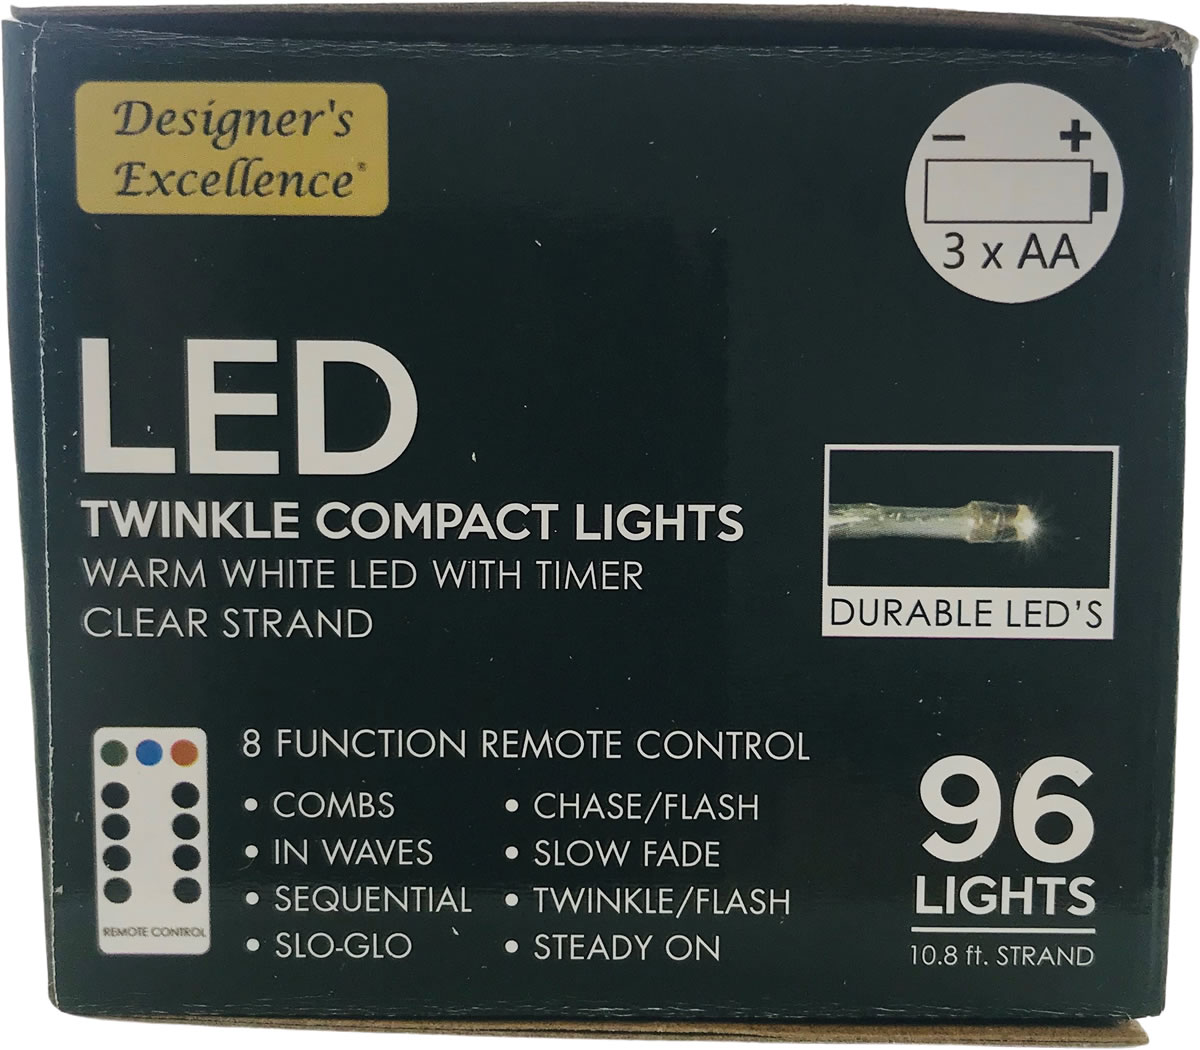 Direct Export Company LED Twinkle Compact Lights 10.8Ft Warm White w Clear Strand Battery Operated 8 Function Remote Control